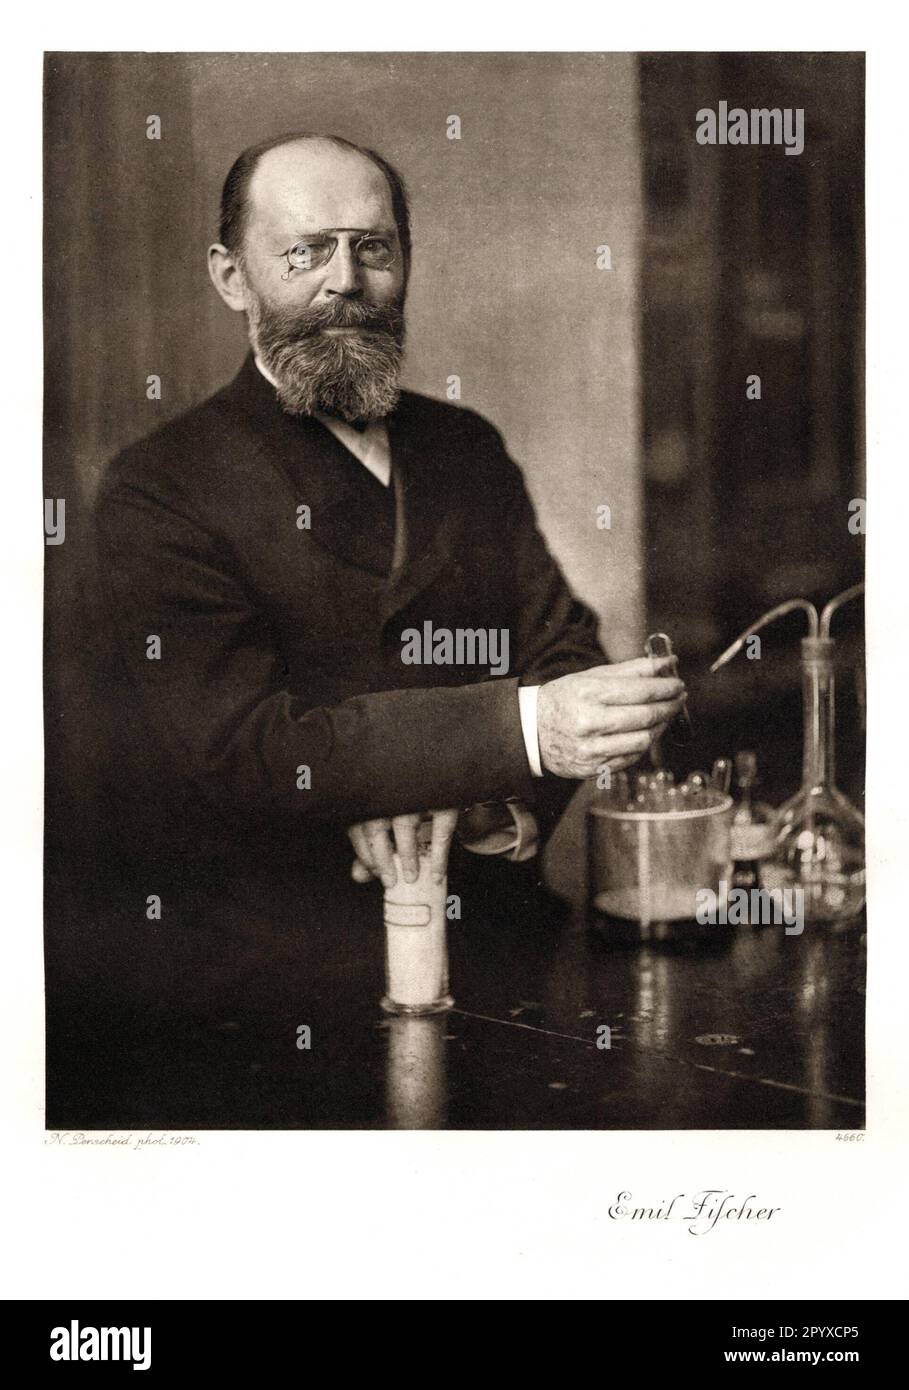 Emil Hermann Fischer (1852-1919), German chemist. Fischer was one of the most important natural product chemists of the 19th/20th centuries. Fischer was awarded the Nobel Prize in Chemistry in 1902 for his work in the field of carbohydrates and purines. Photograph by Nicola Perscheid. Photo: Heliogravure, Corpus Imaginum, Hanfstaengl Collection. [automated translation] Stock Photo